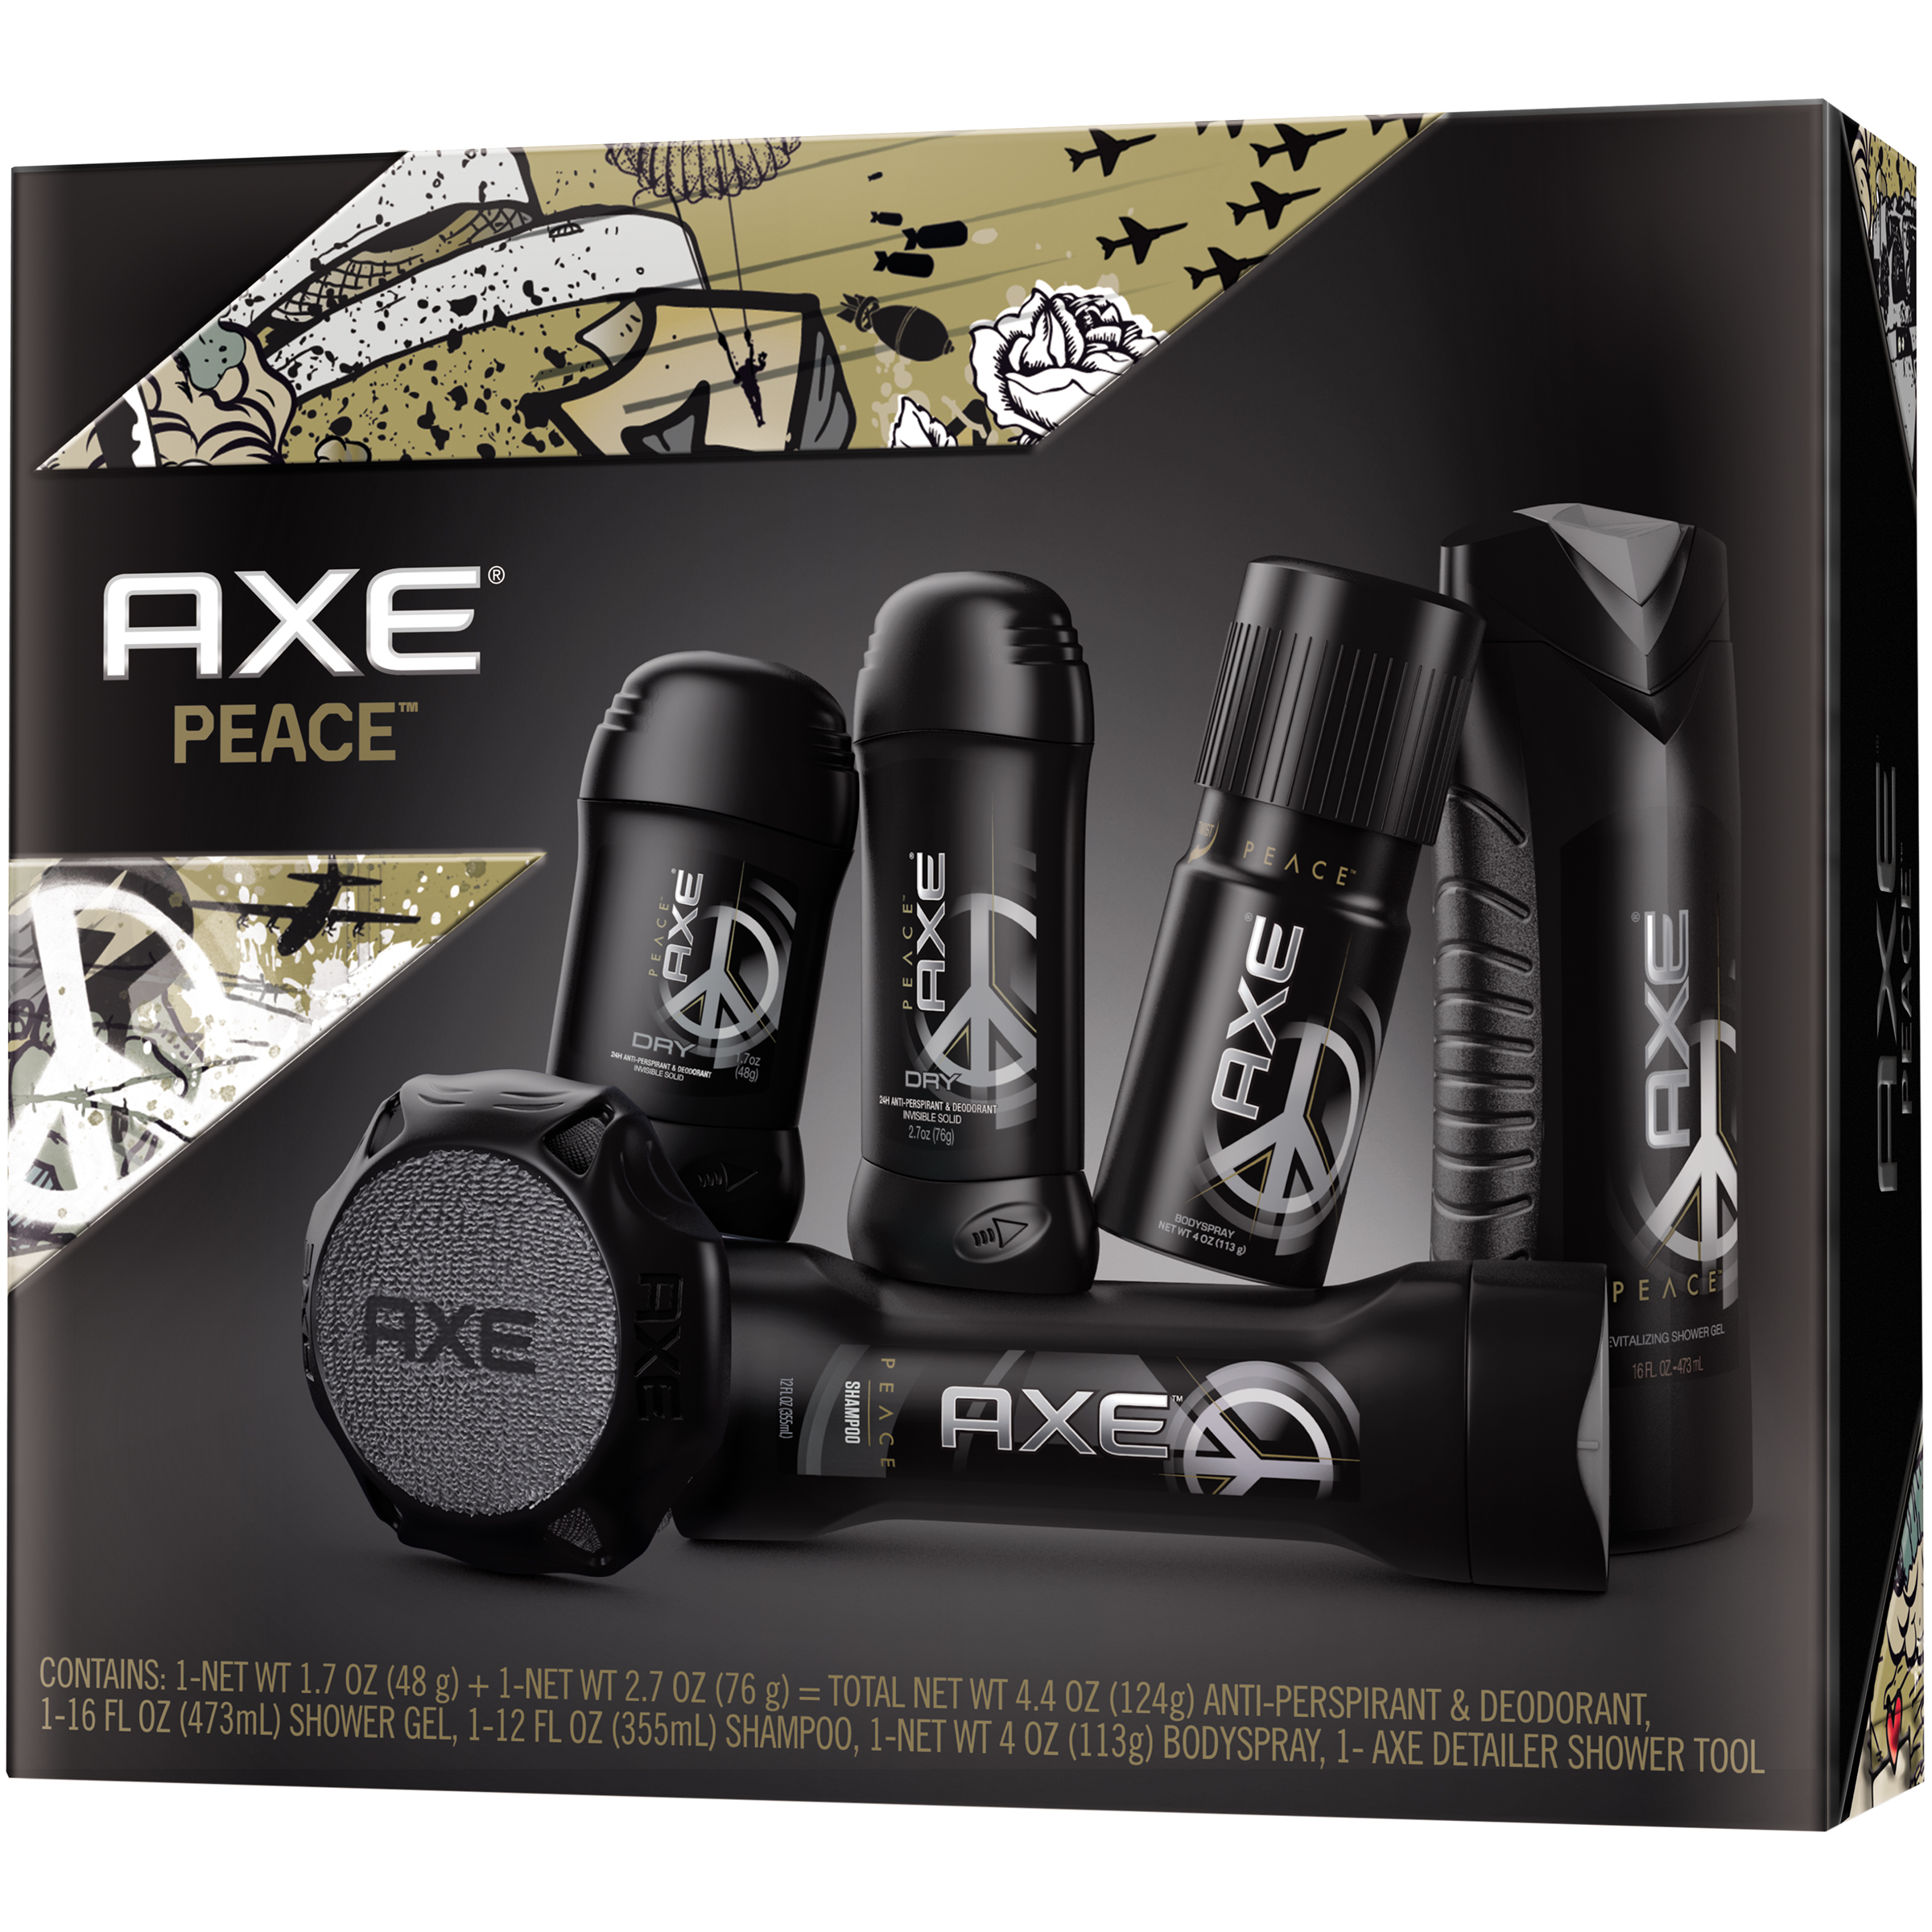 AXE Gift Sets From $4.39 | Over 50% Off + Free Pickup!